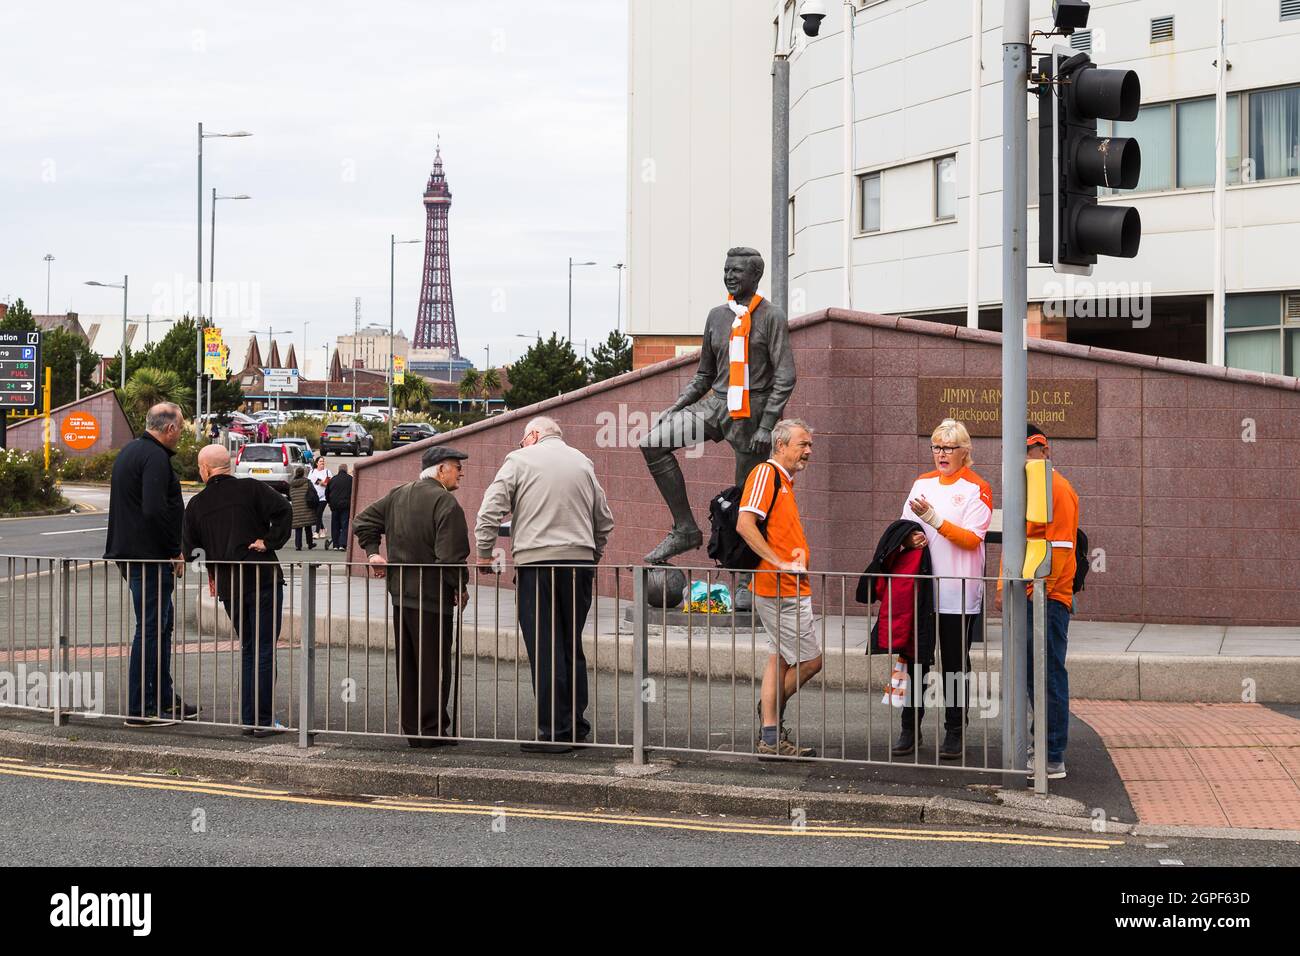 Blackpool FC fans gather on a matchday next to the Jimmy Armfield statue at Bloomfield Road with the Blackpool Tower in the distance.  Seen in Septemb Stock Photo